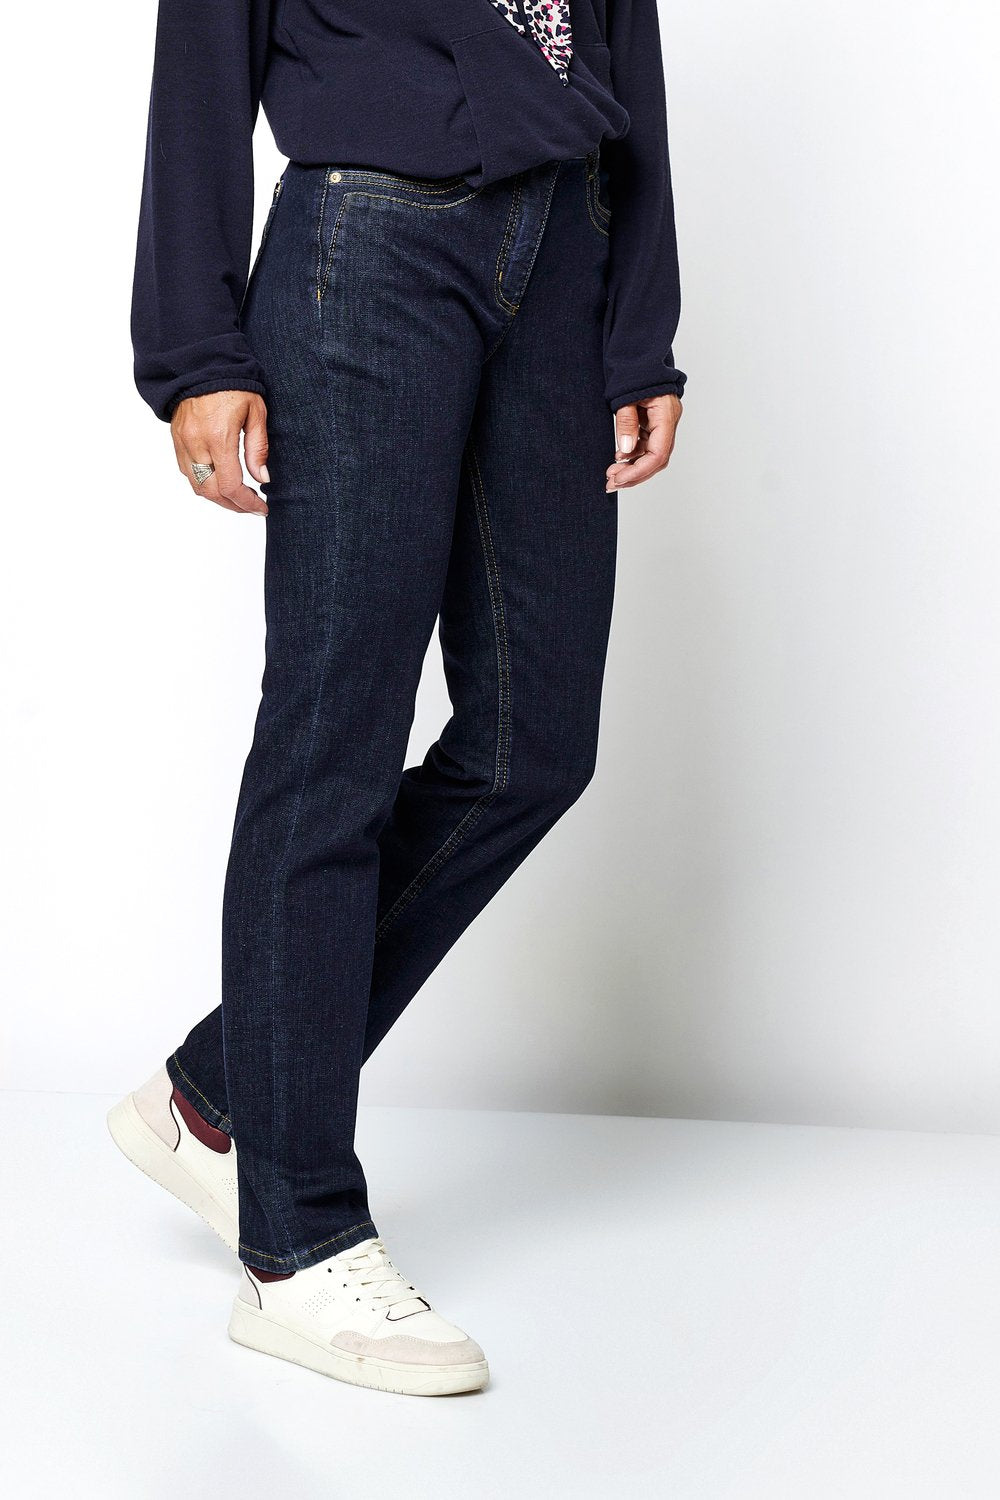 toni be loved straight leg jeans in rinsed blue (front)